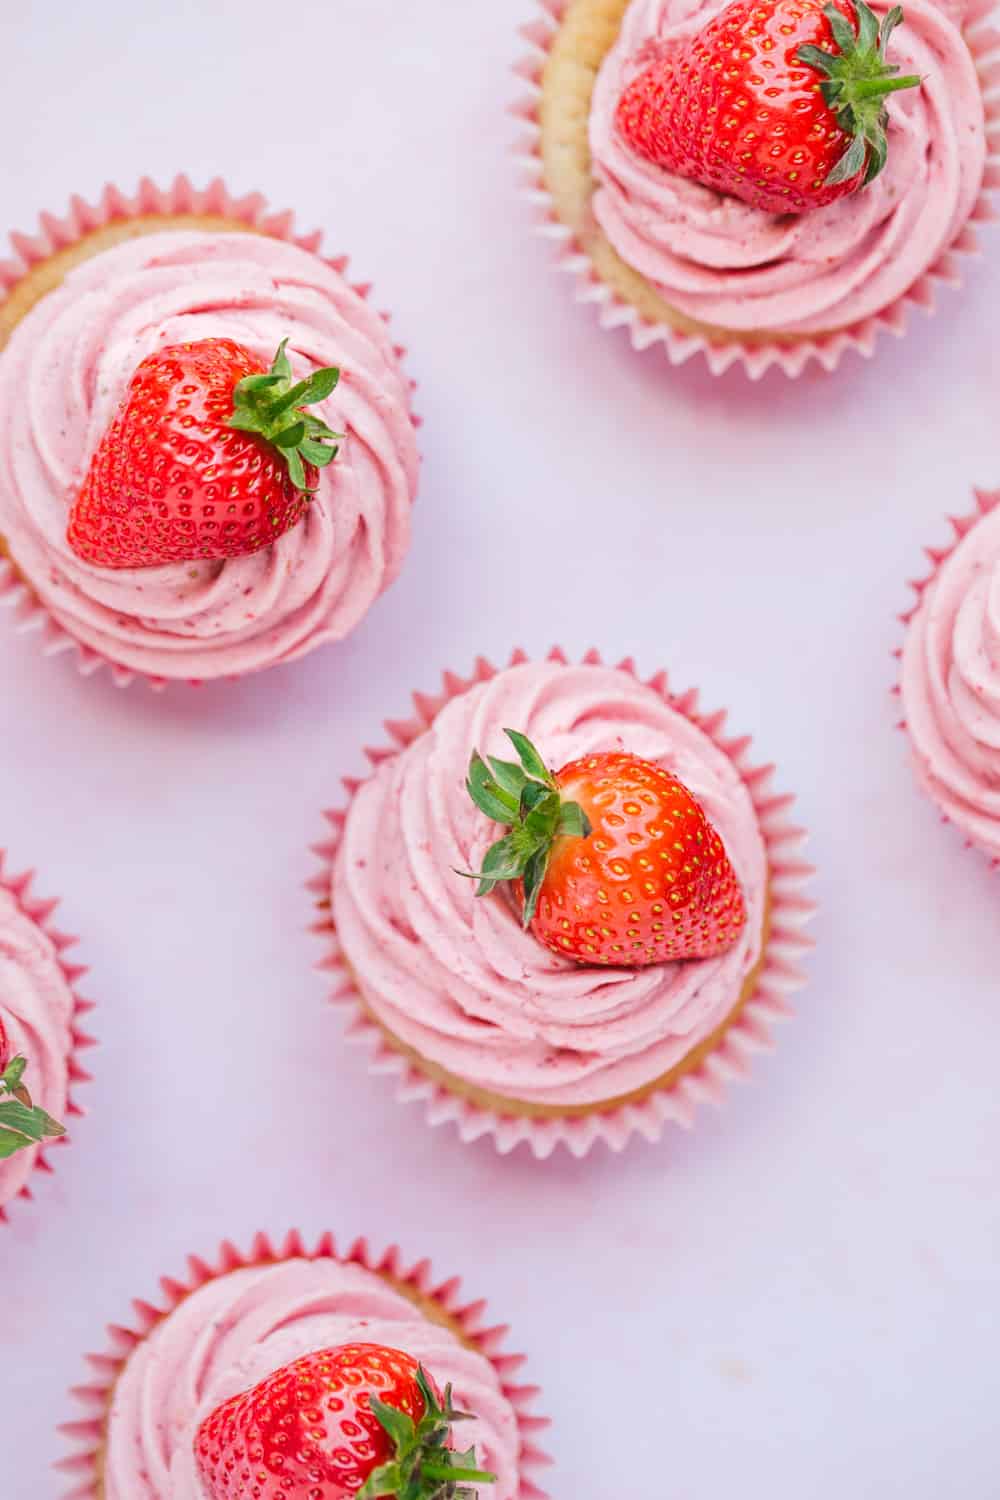 Overhead view of pink strawberry cupcakes